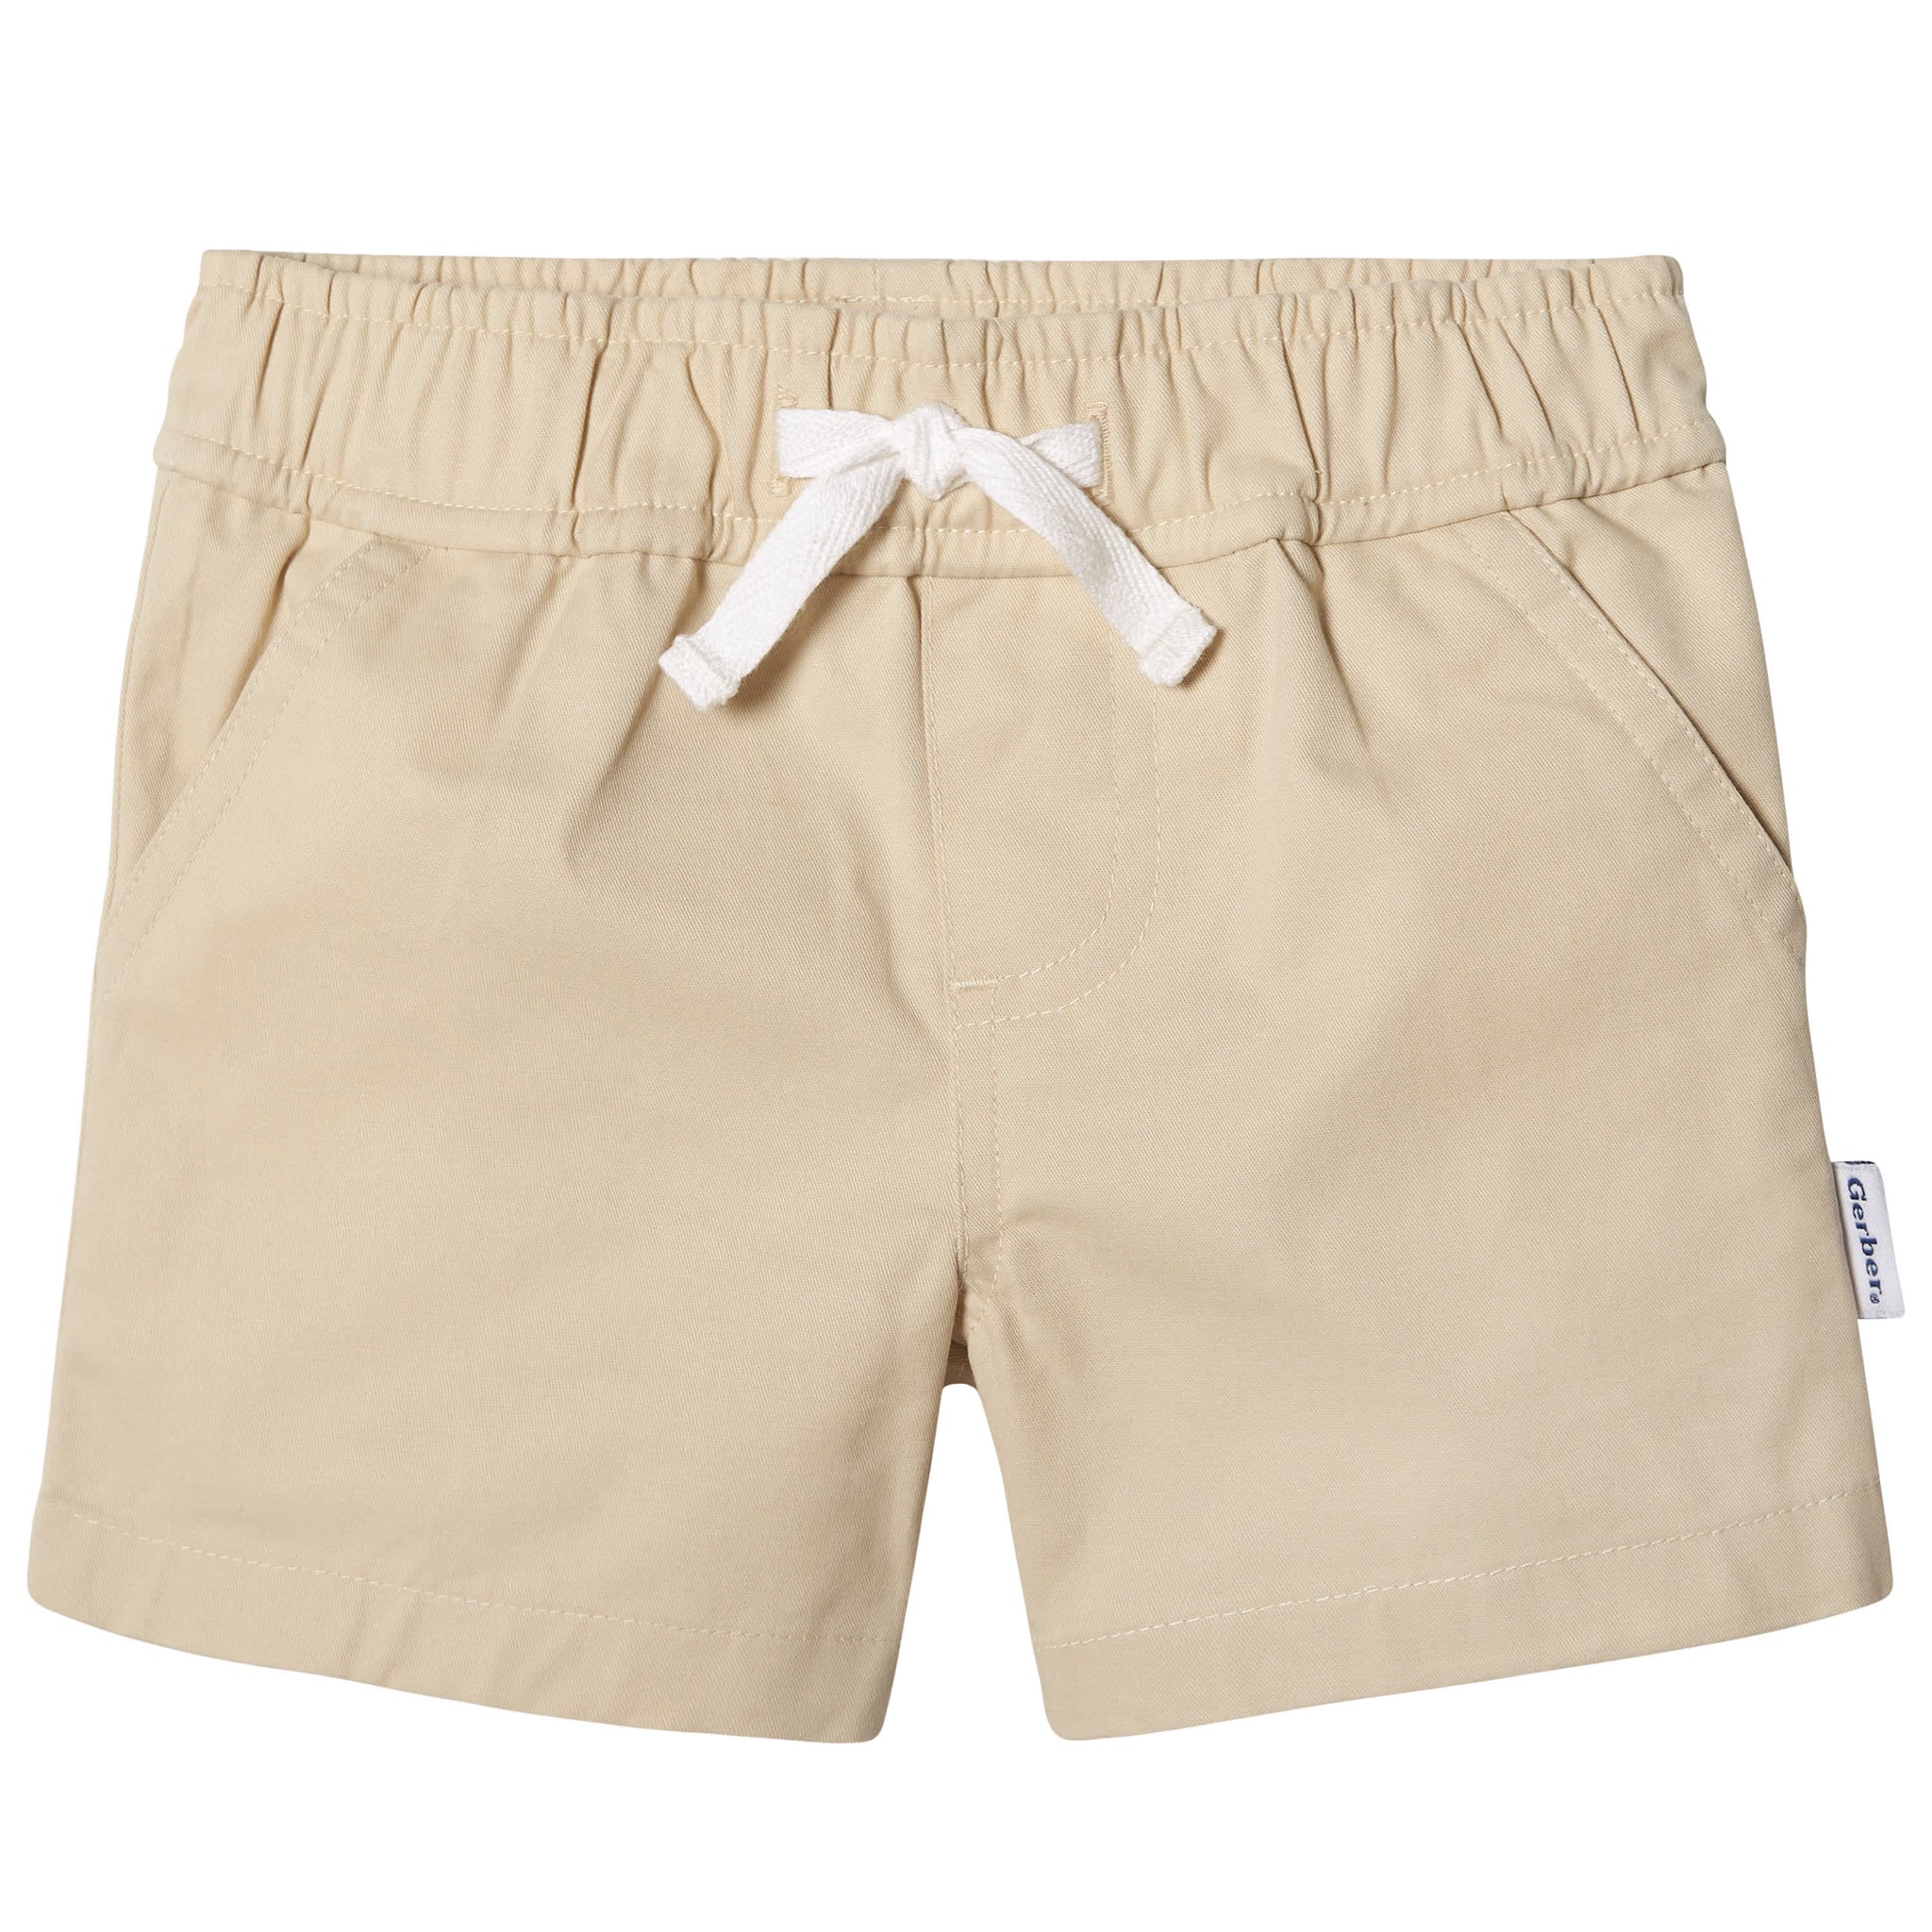 2-Pack Baby & Toddler Boys Navy Stripe and Khaki Twill Shorts-Gerber Childrenswear Wholesale